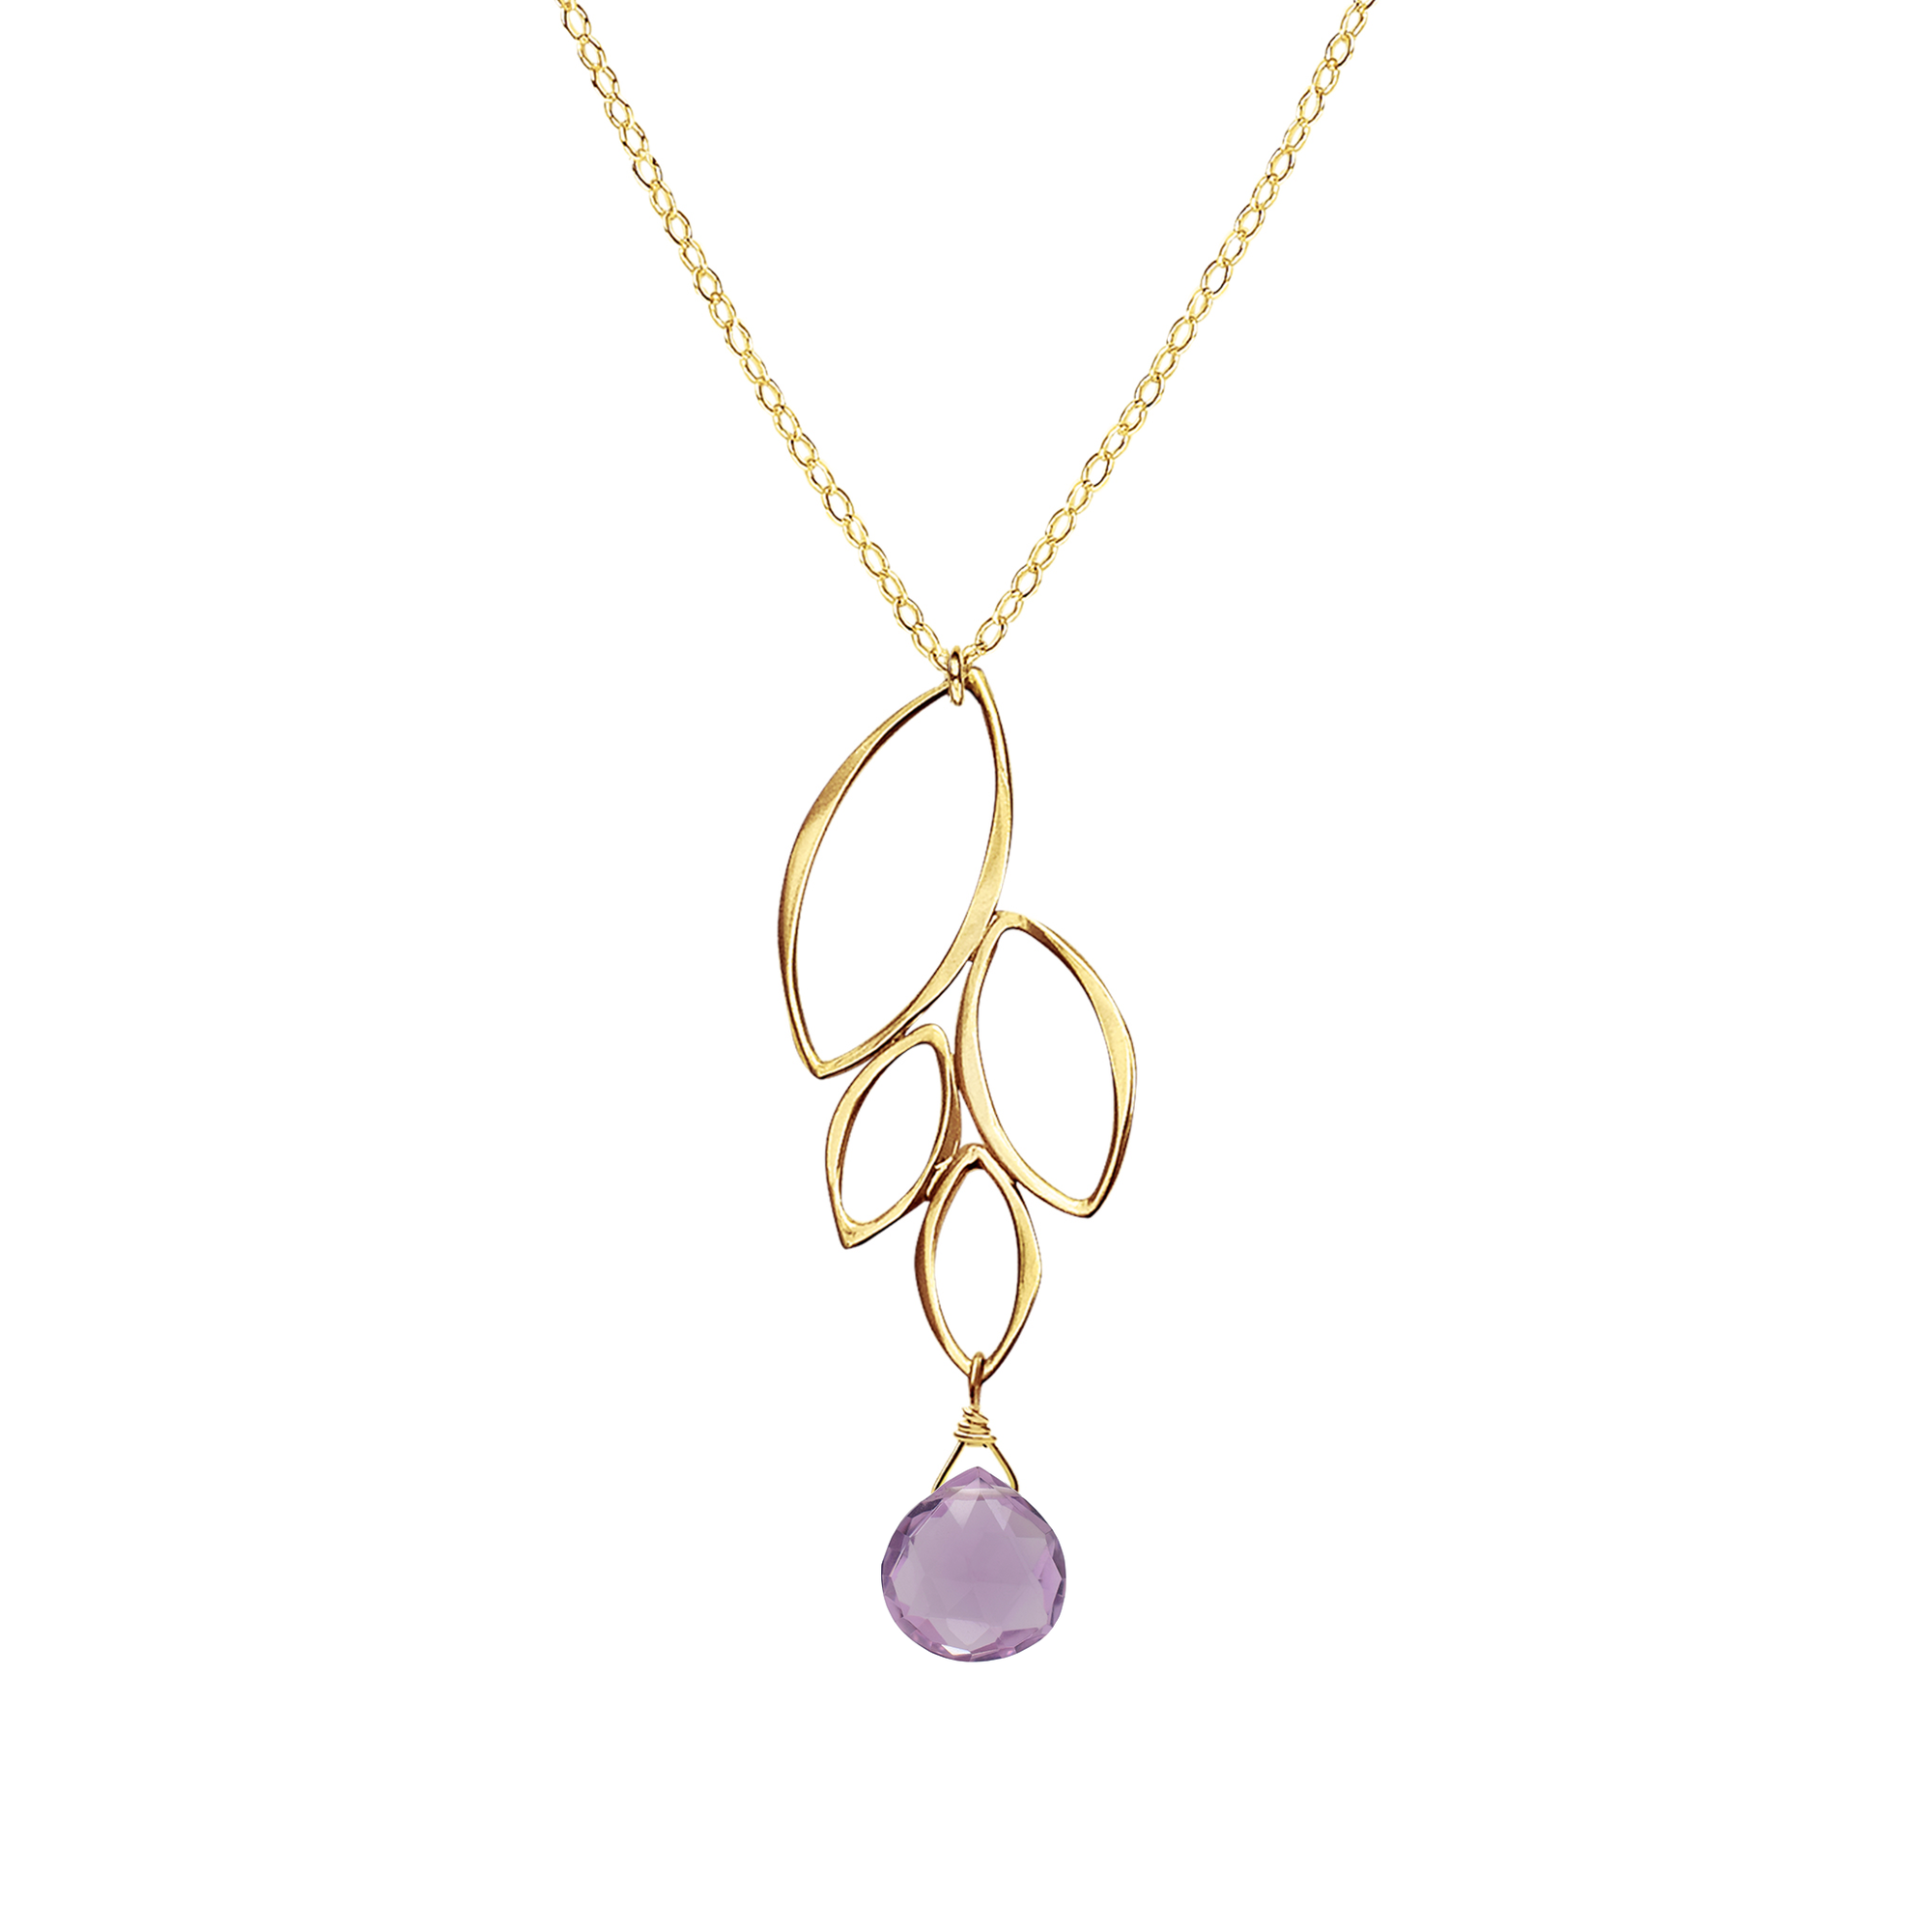 Image of a gold four leaf dangle necklace with pink purple amethyst gemstone on white background